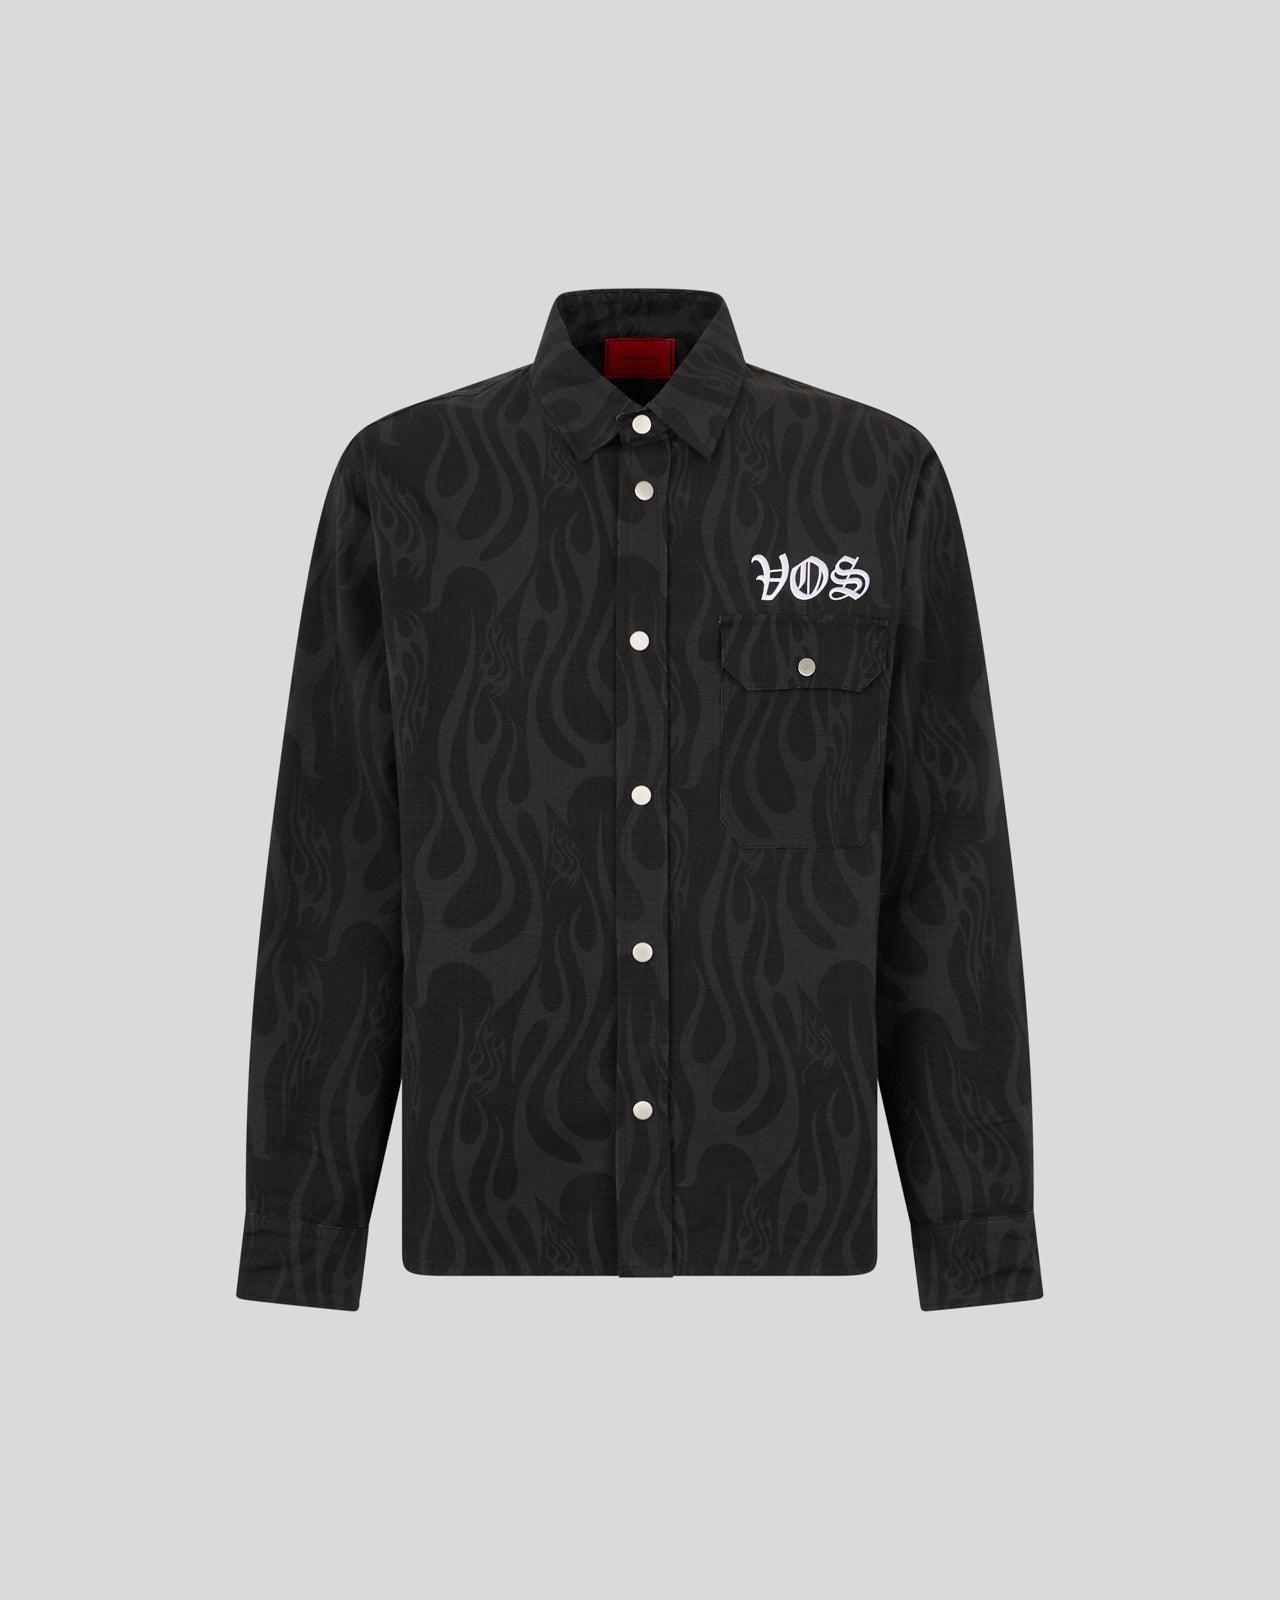 BLACK CARGO JACKET WITH ALL OVER FLAMES PRINT AND GOTIC LOGO